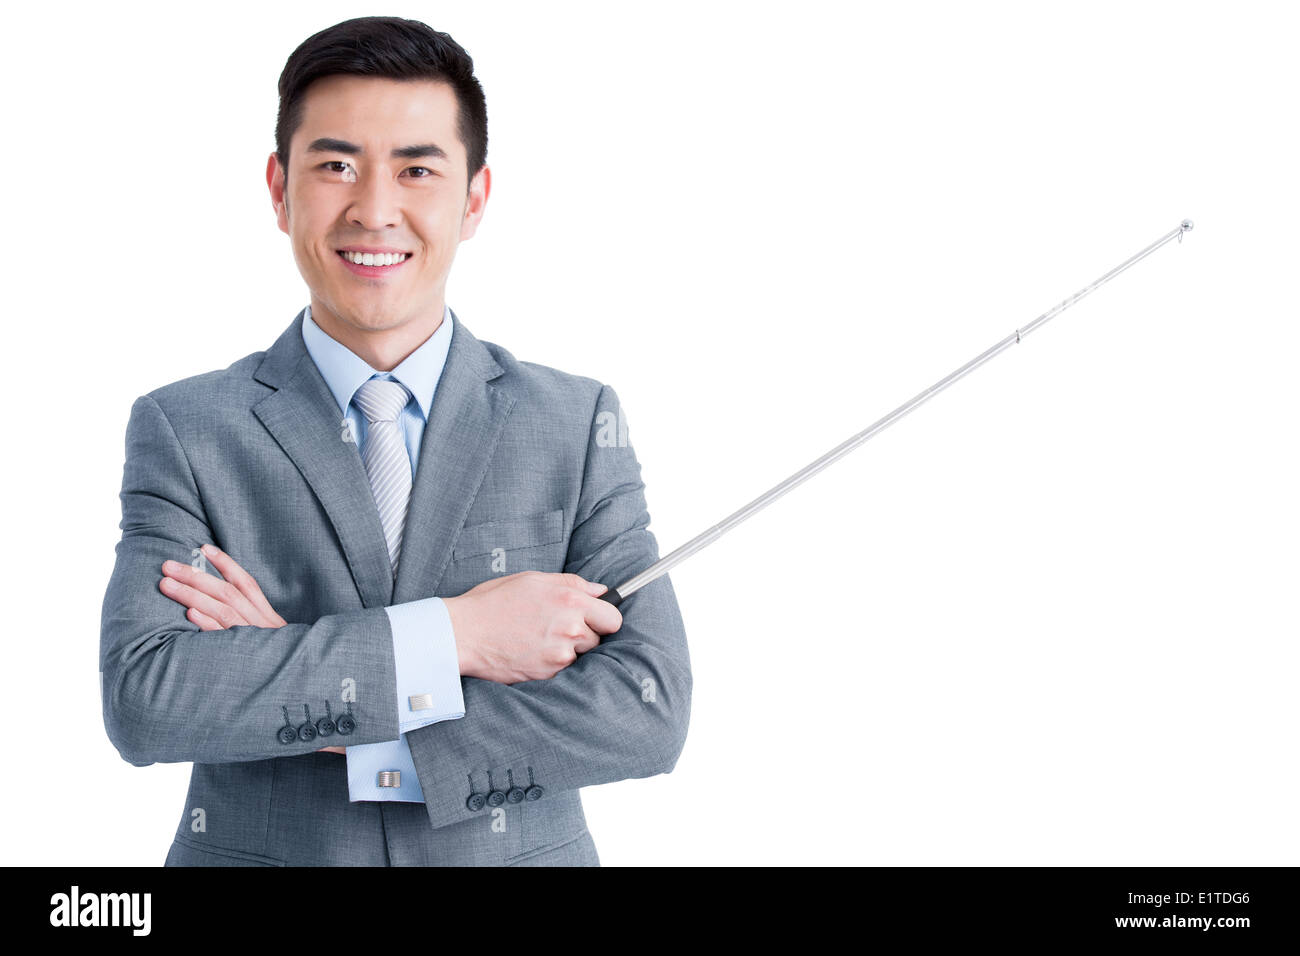 Male training specialist with pointer stick Stock Photo